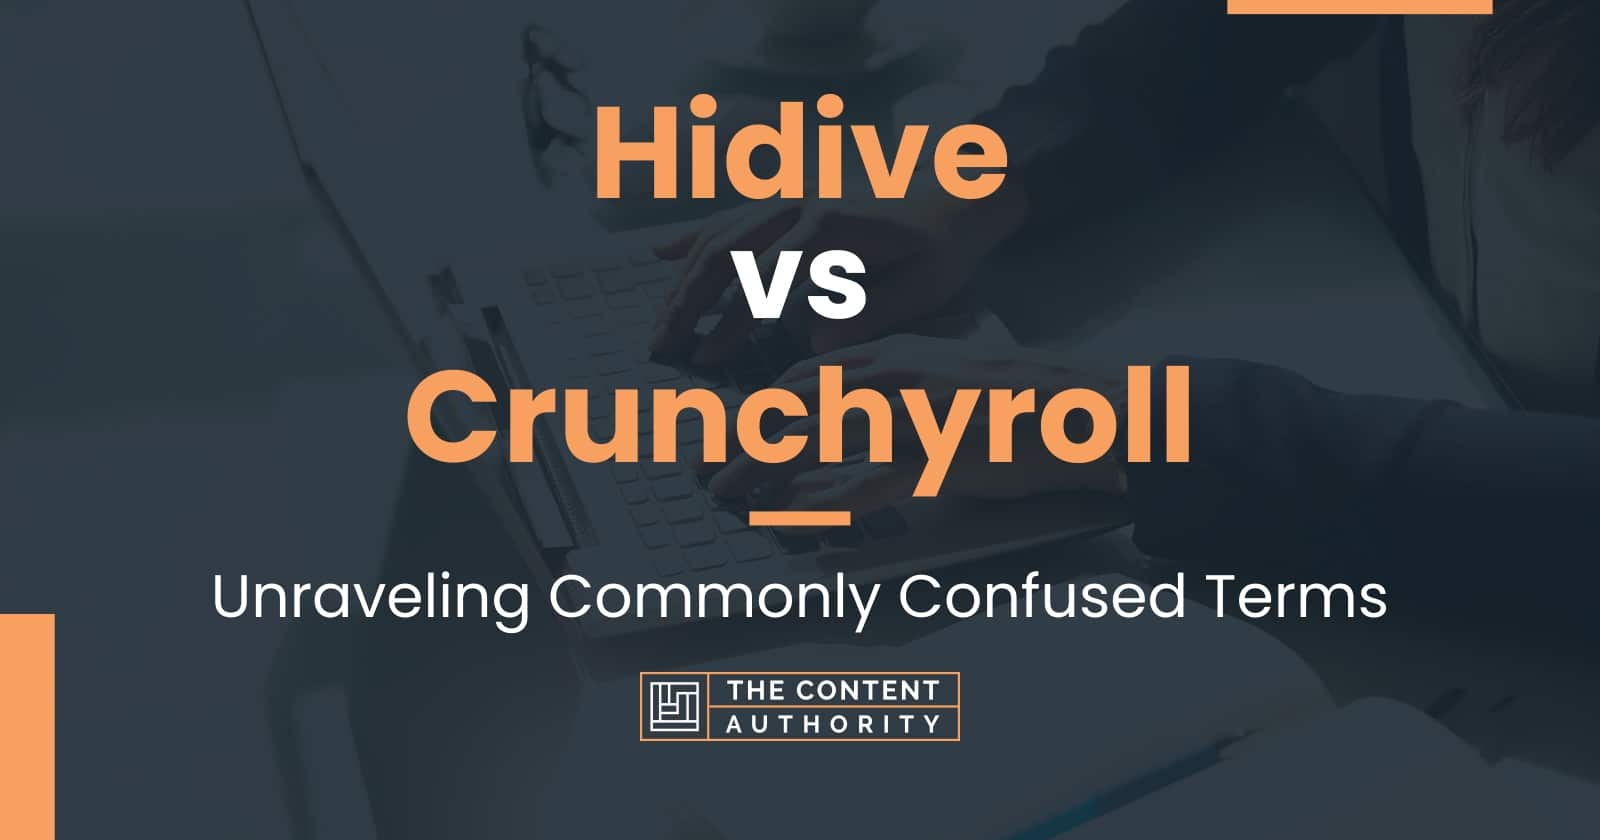 Hidive vs Crunchyroll Unraveling Commonly Confused Terms